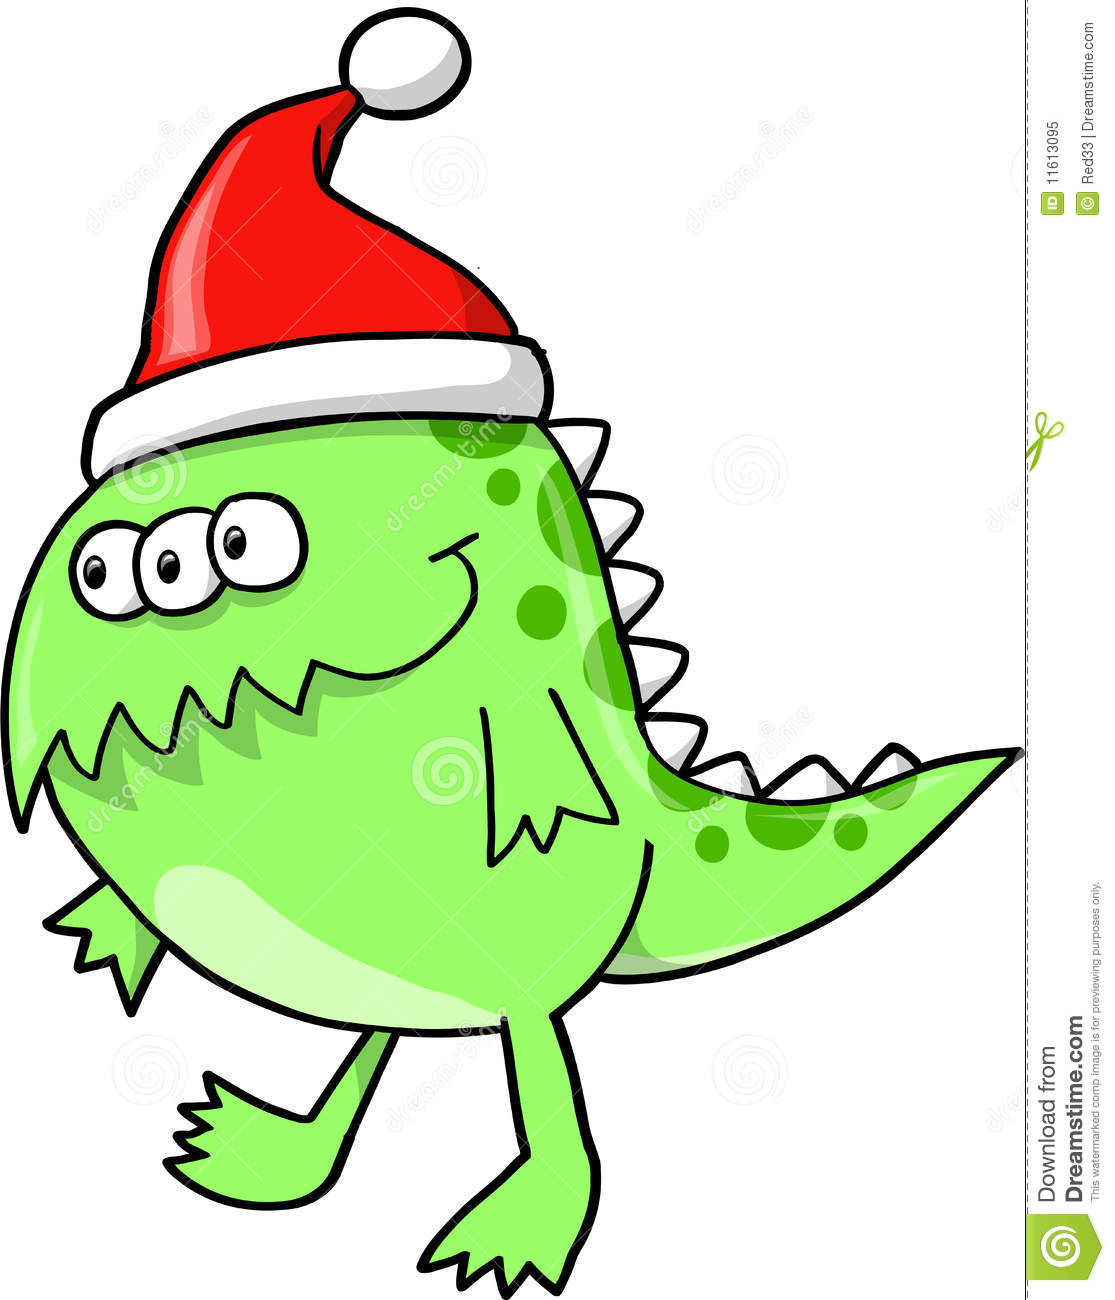 Christmas Holiday Monster Alien Royalty Free Stock Photo   Image